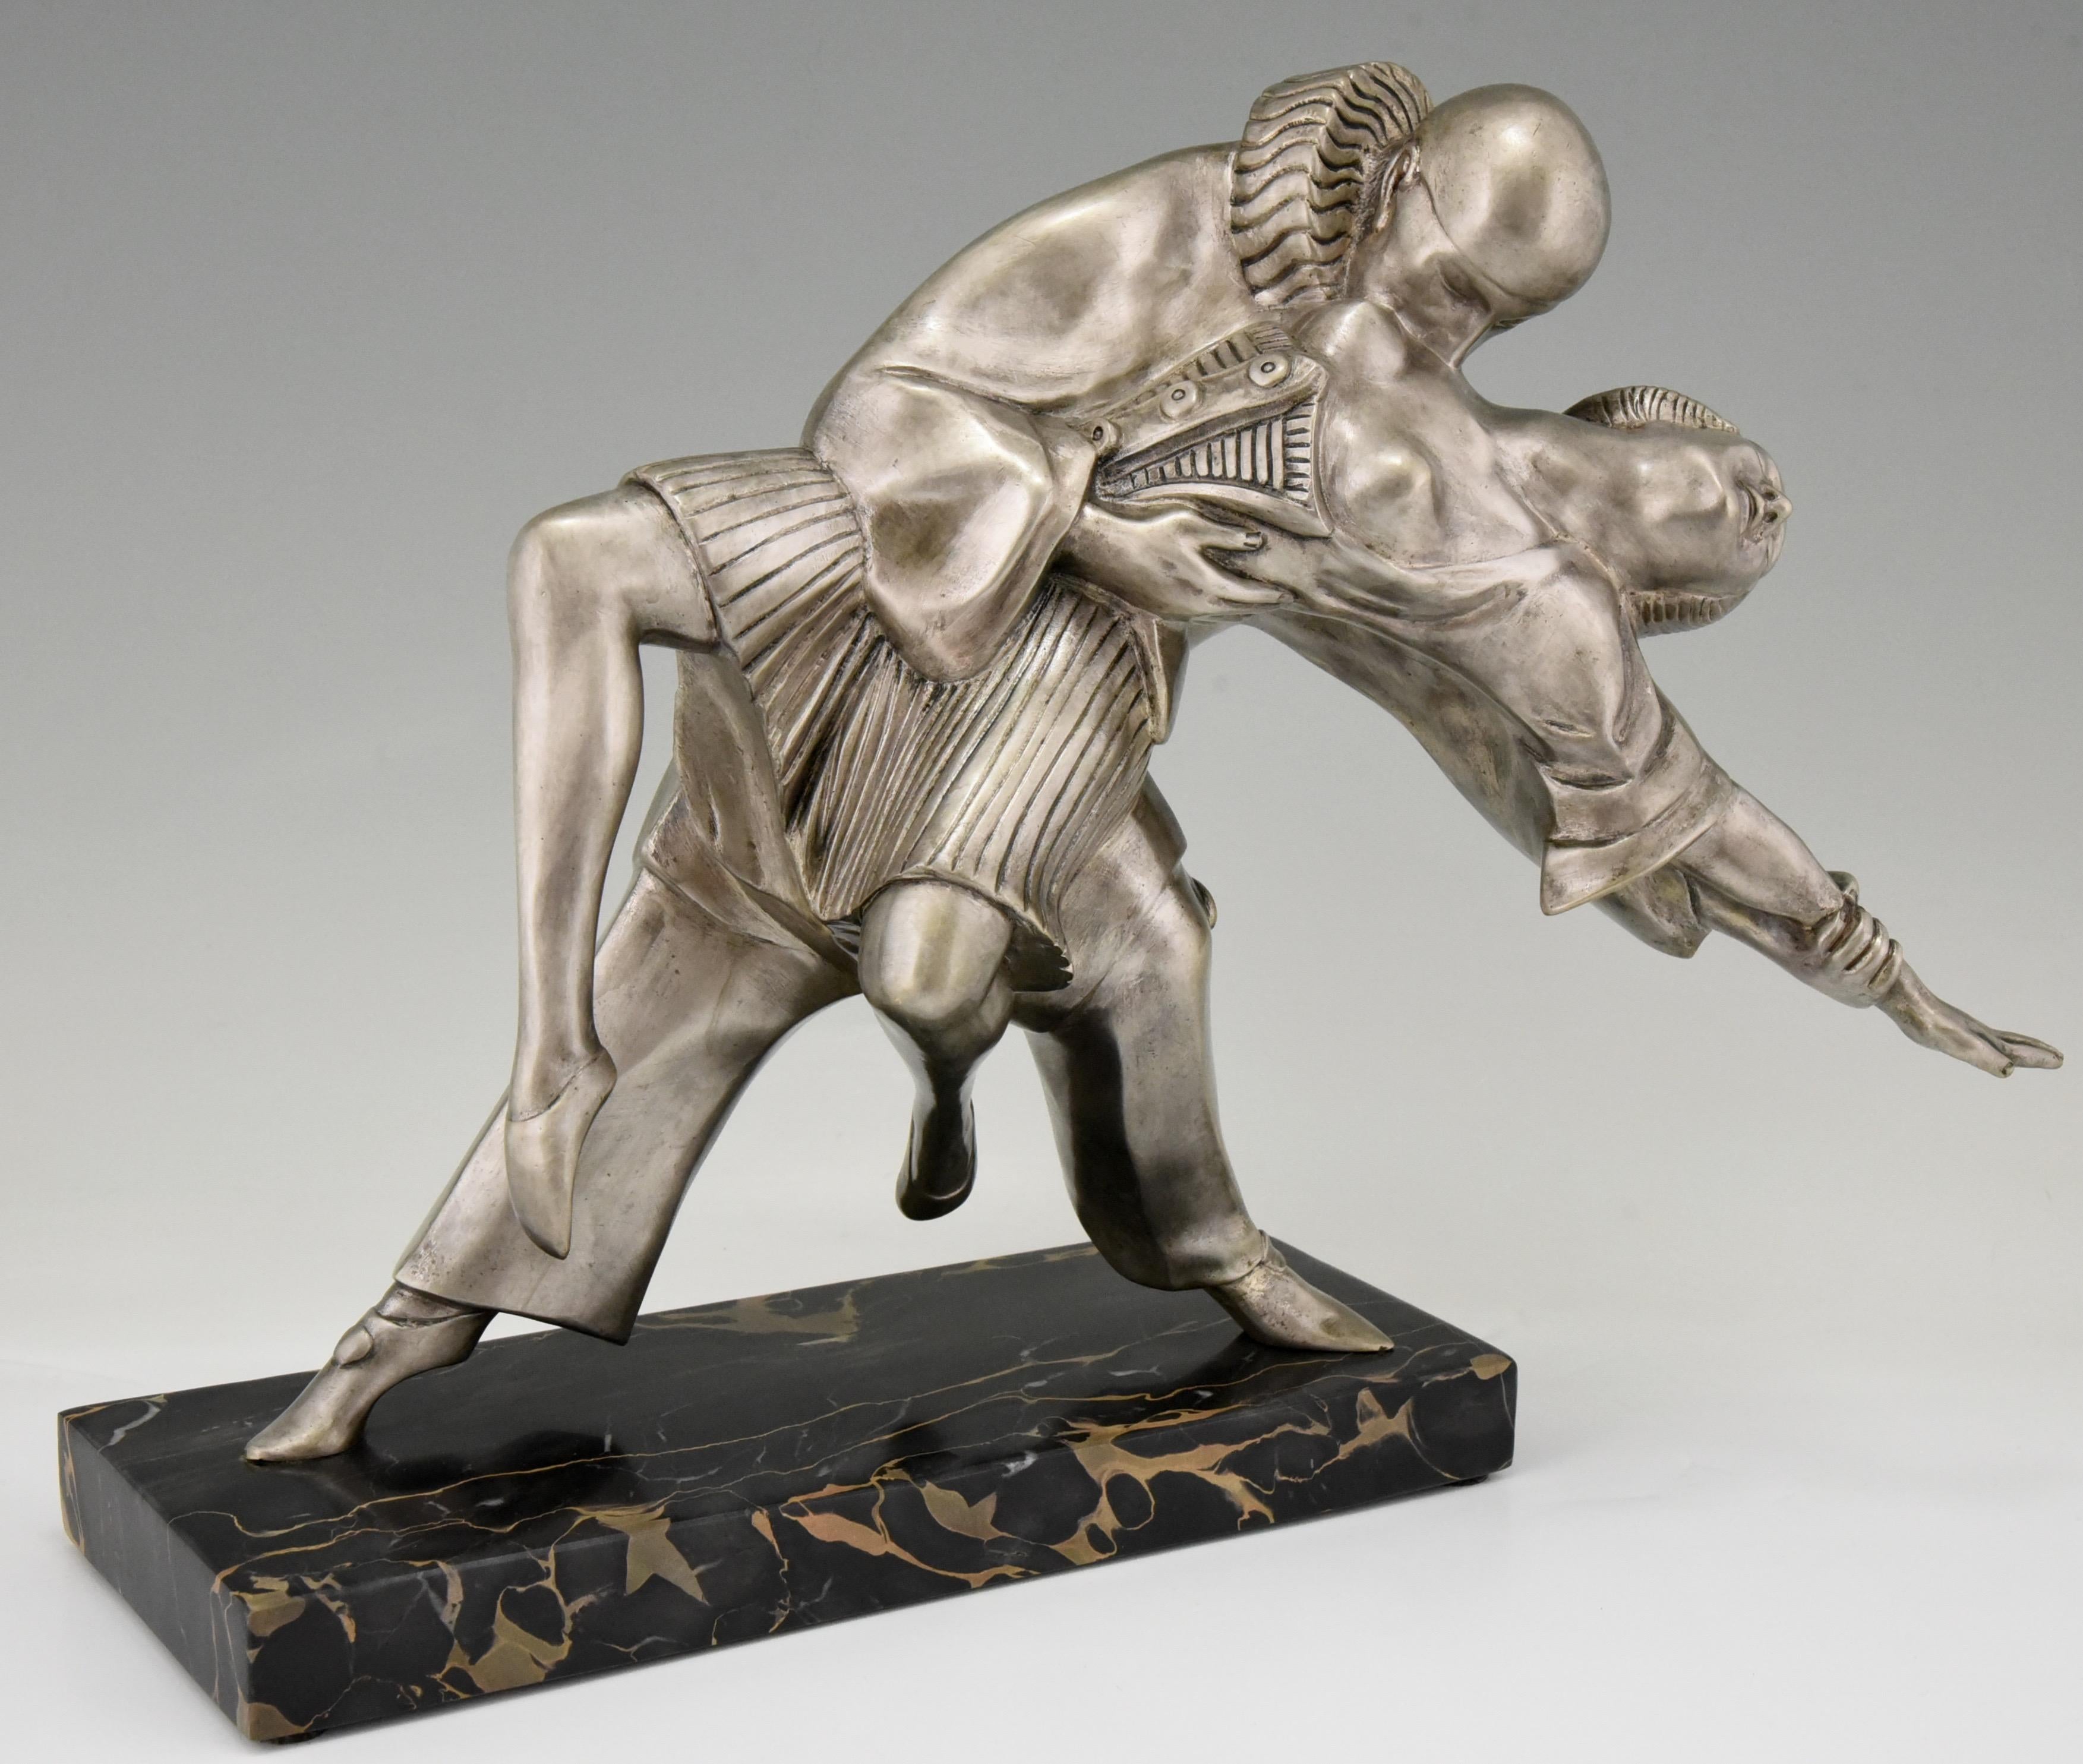 Tango, an Art Deco bronze sculpture of cubist dancers Pierrot and Colombine by Thomas Cartier, France, 1930.
The bronze has a silver patina and stands on a Portor marble base.

